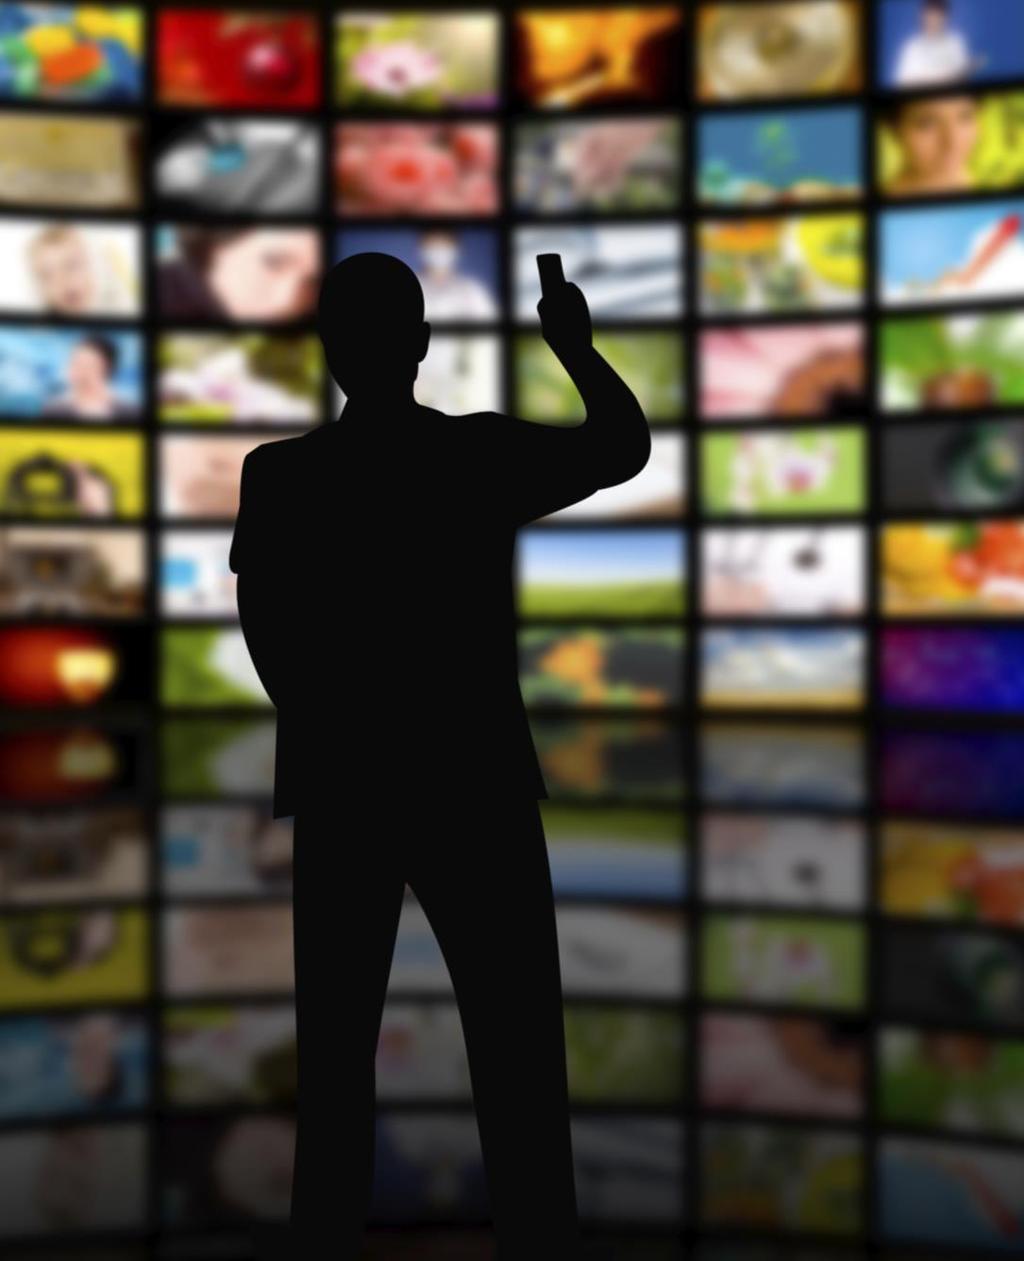 GROWING NUMBER OF TV ADS SEEN EVERY DAY 45 (+6 TV ads viewed every day by UK consumers in 2016 more ads than 2006) TV, at least in the foreseeable future, is always going to have a place in big